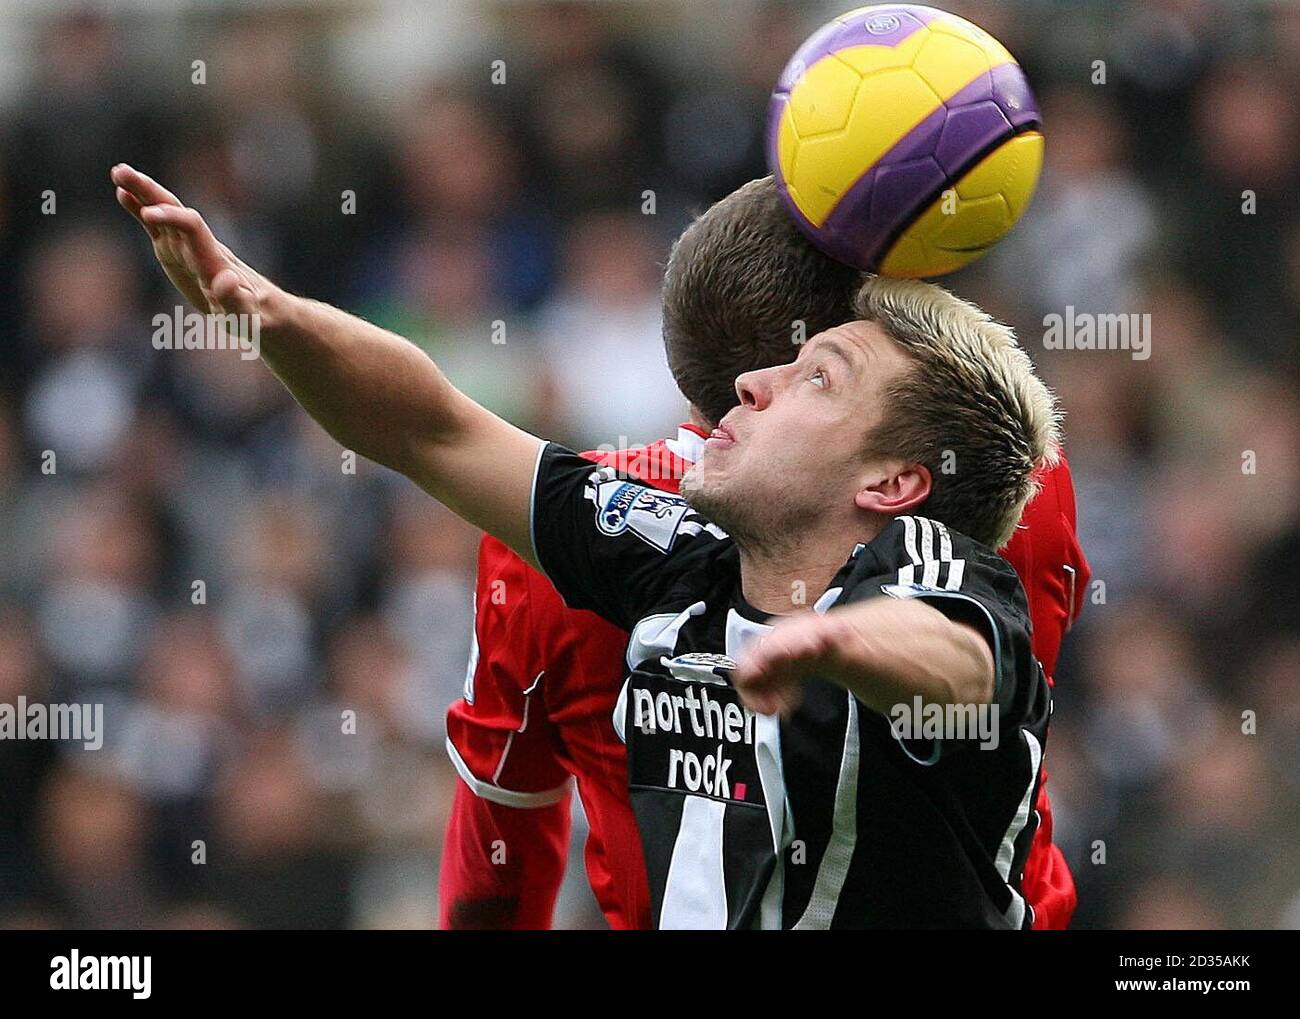 Newcastle's Alan Smith in action during the Barclays Premier League match at St James' Park, Newcastle. Stock Photo